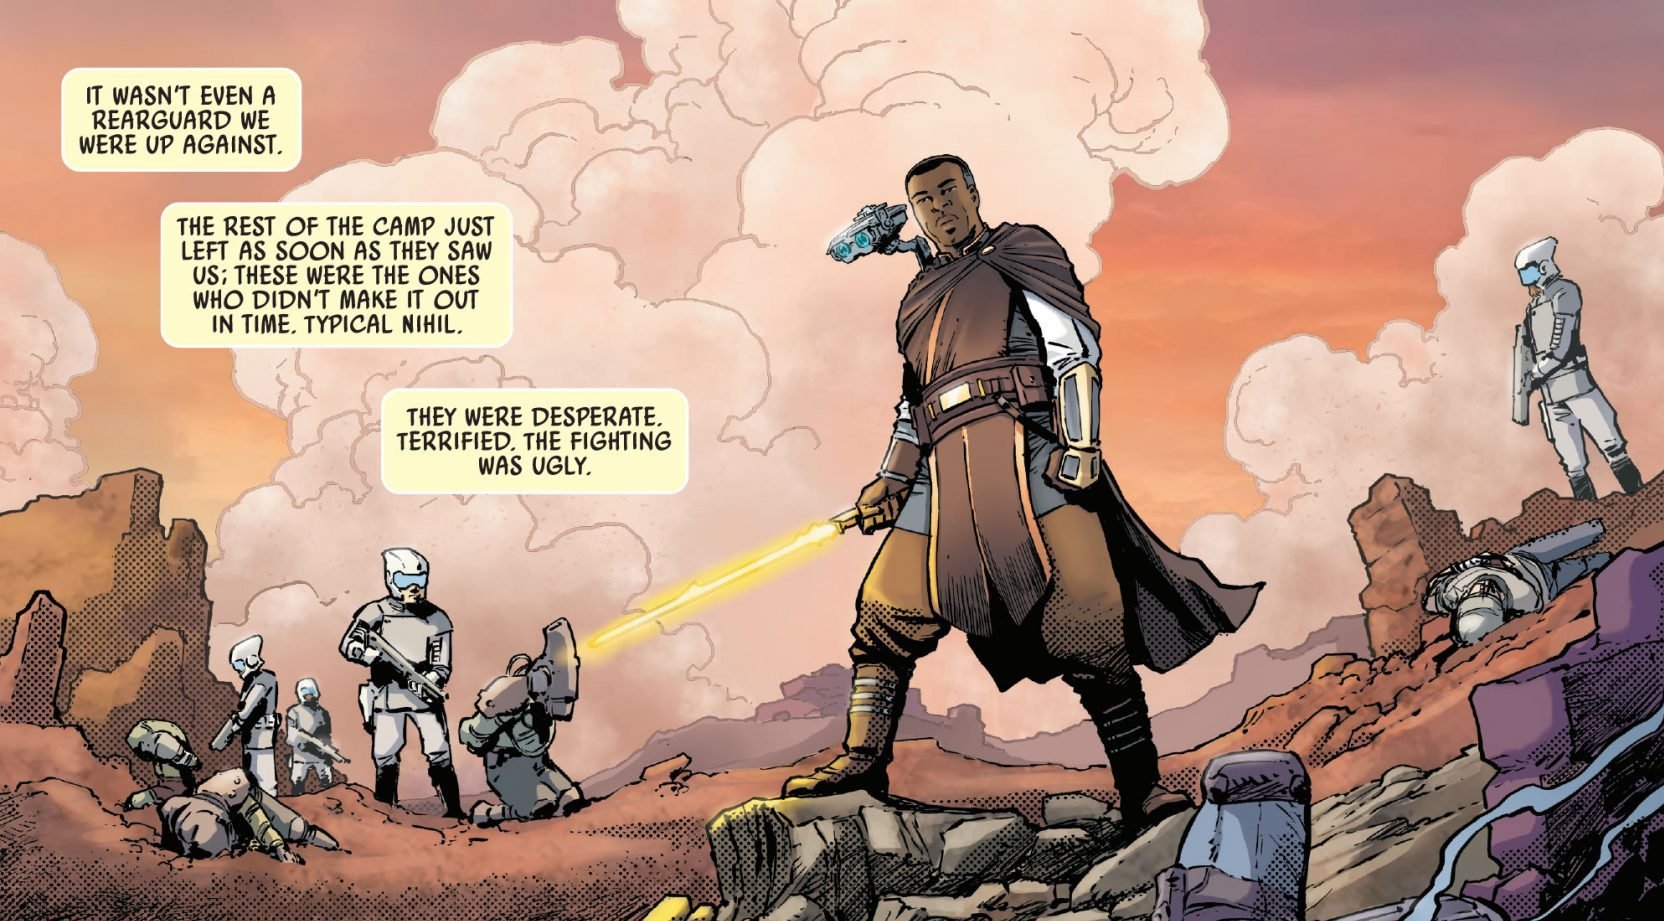 Review: Mysteries and Creepy Nursery Rhymes Abound in &#39;Star Wars: The High Republic - Trail of Shadows&#39; #1 - Star Wars News Net